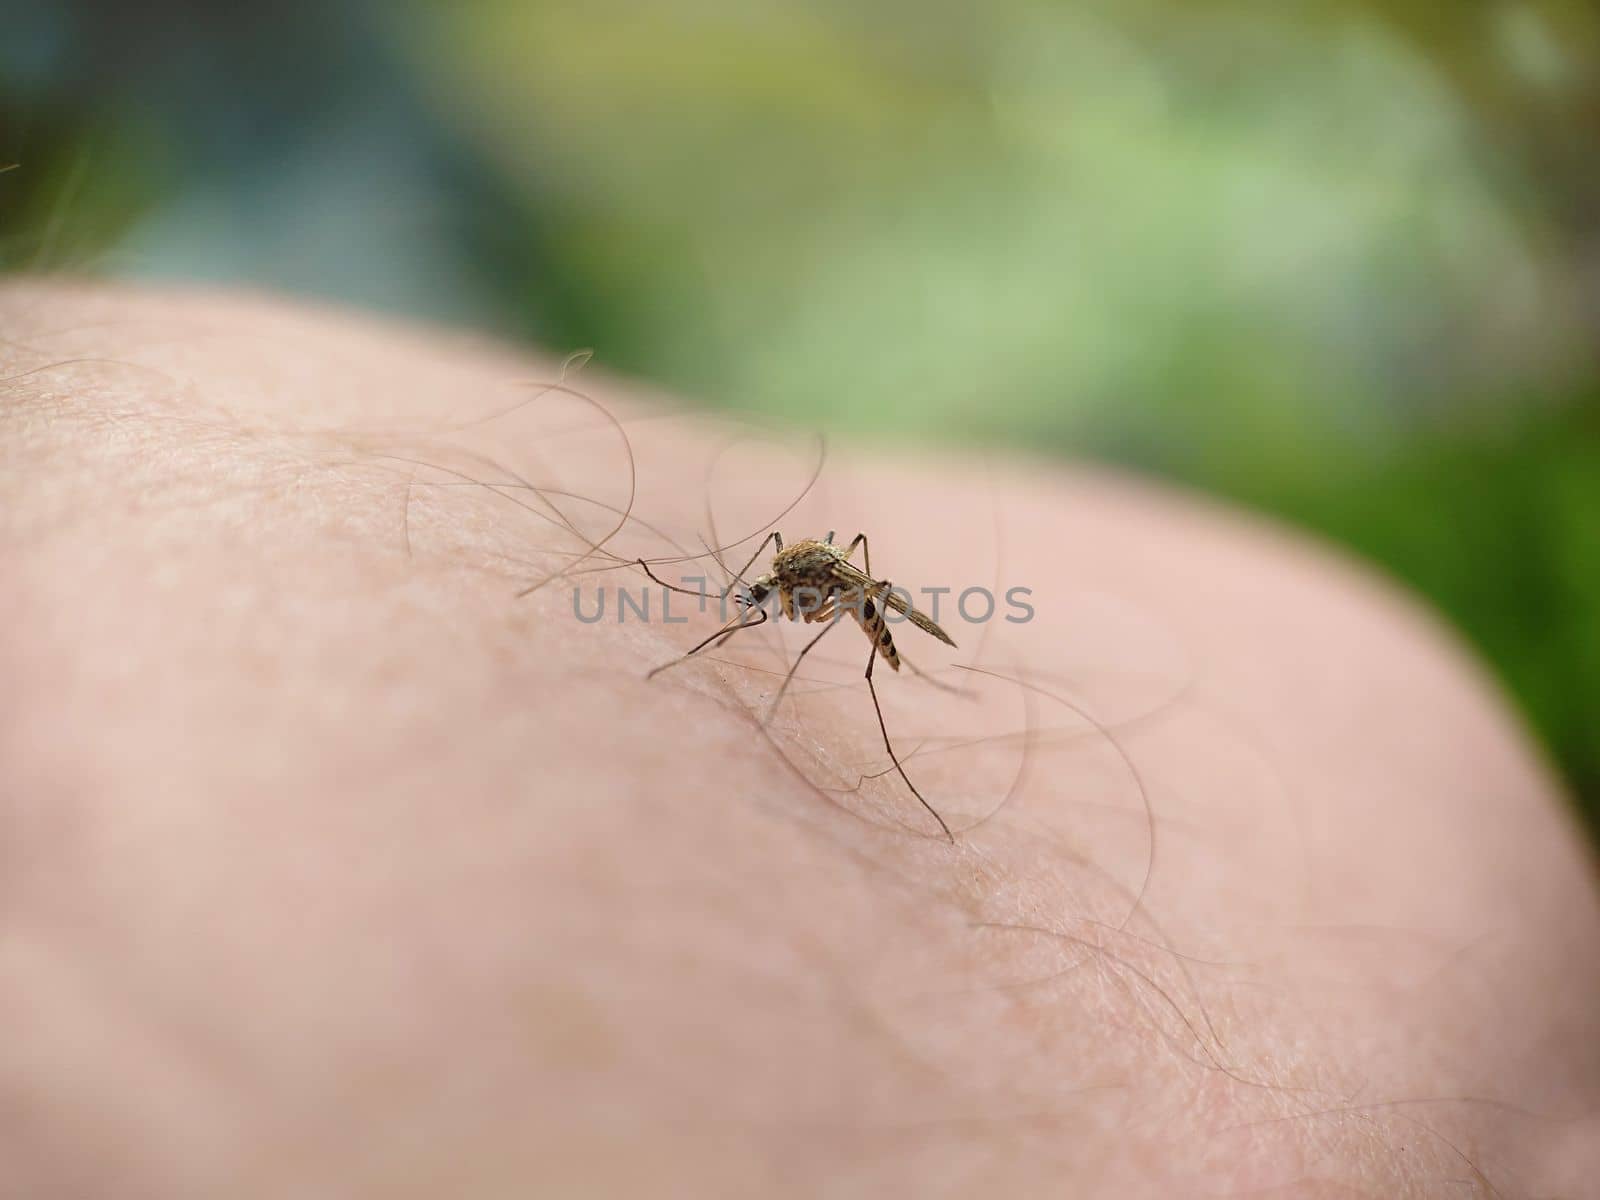 A striped mosquito landed on the hairy leg of a man in the open air.Macrophotography.Selective focus.